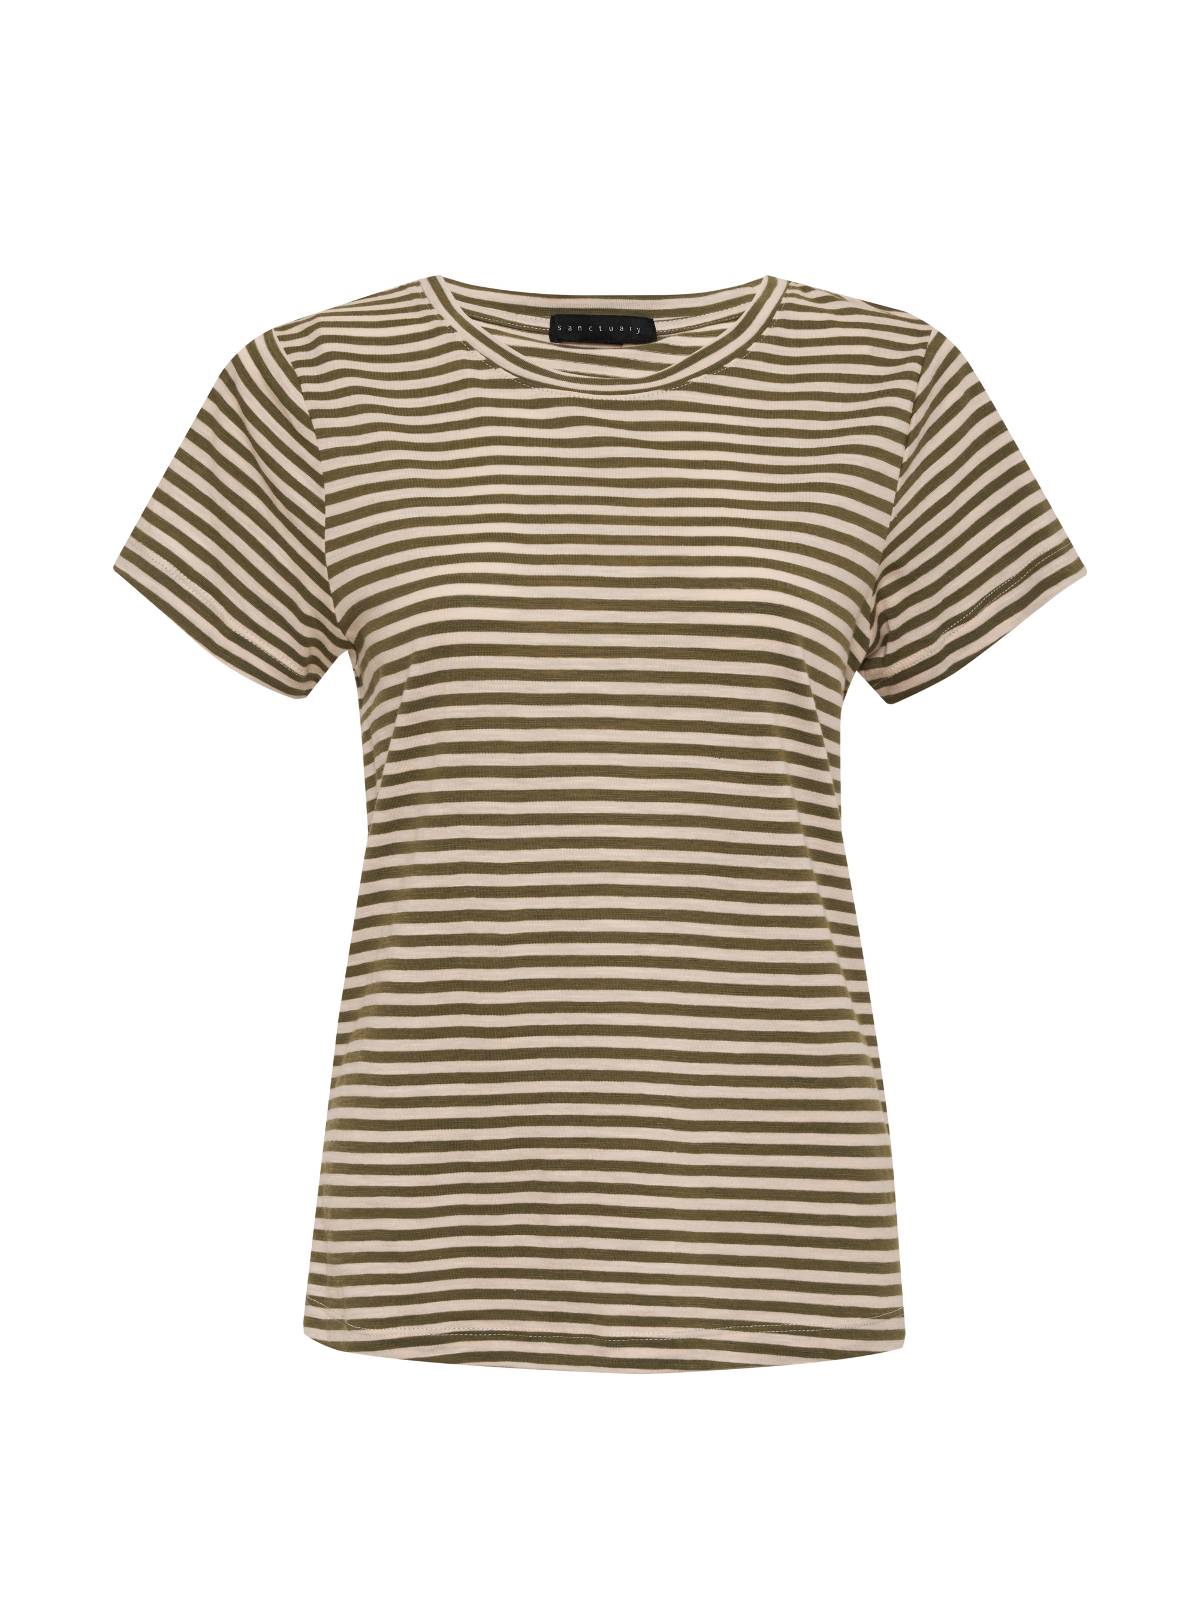 The Perfect Tee Burnt Olive Stripe